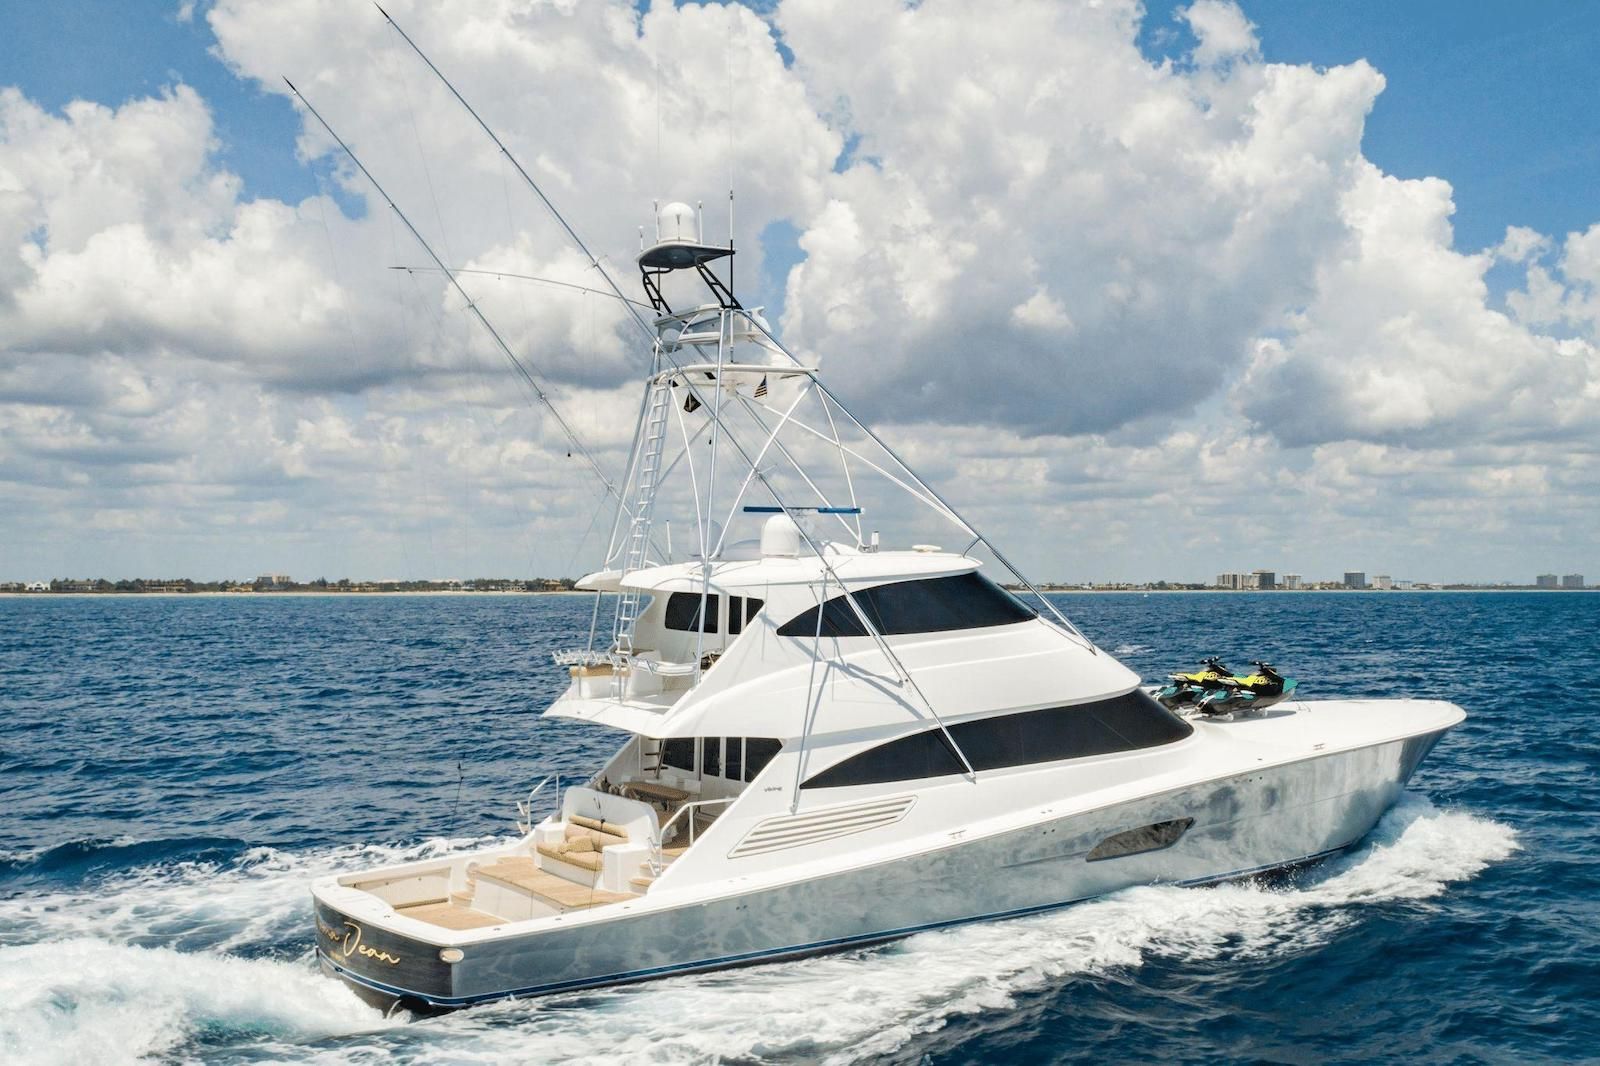 Fishing Yachts for Sale - IYC